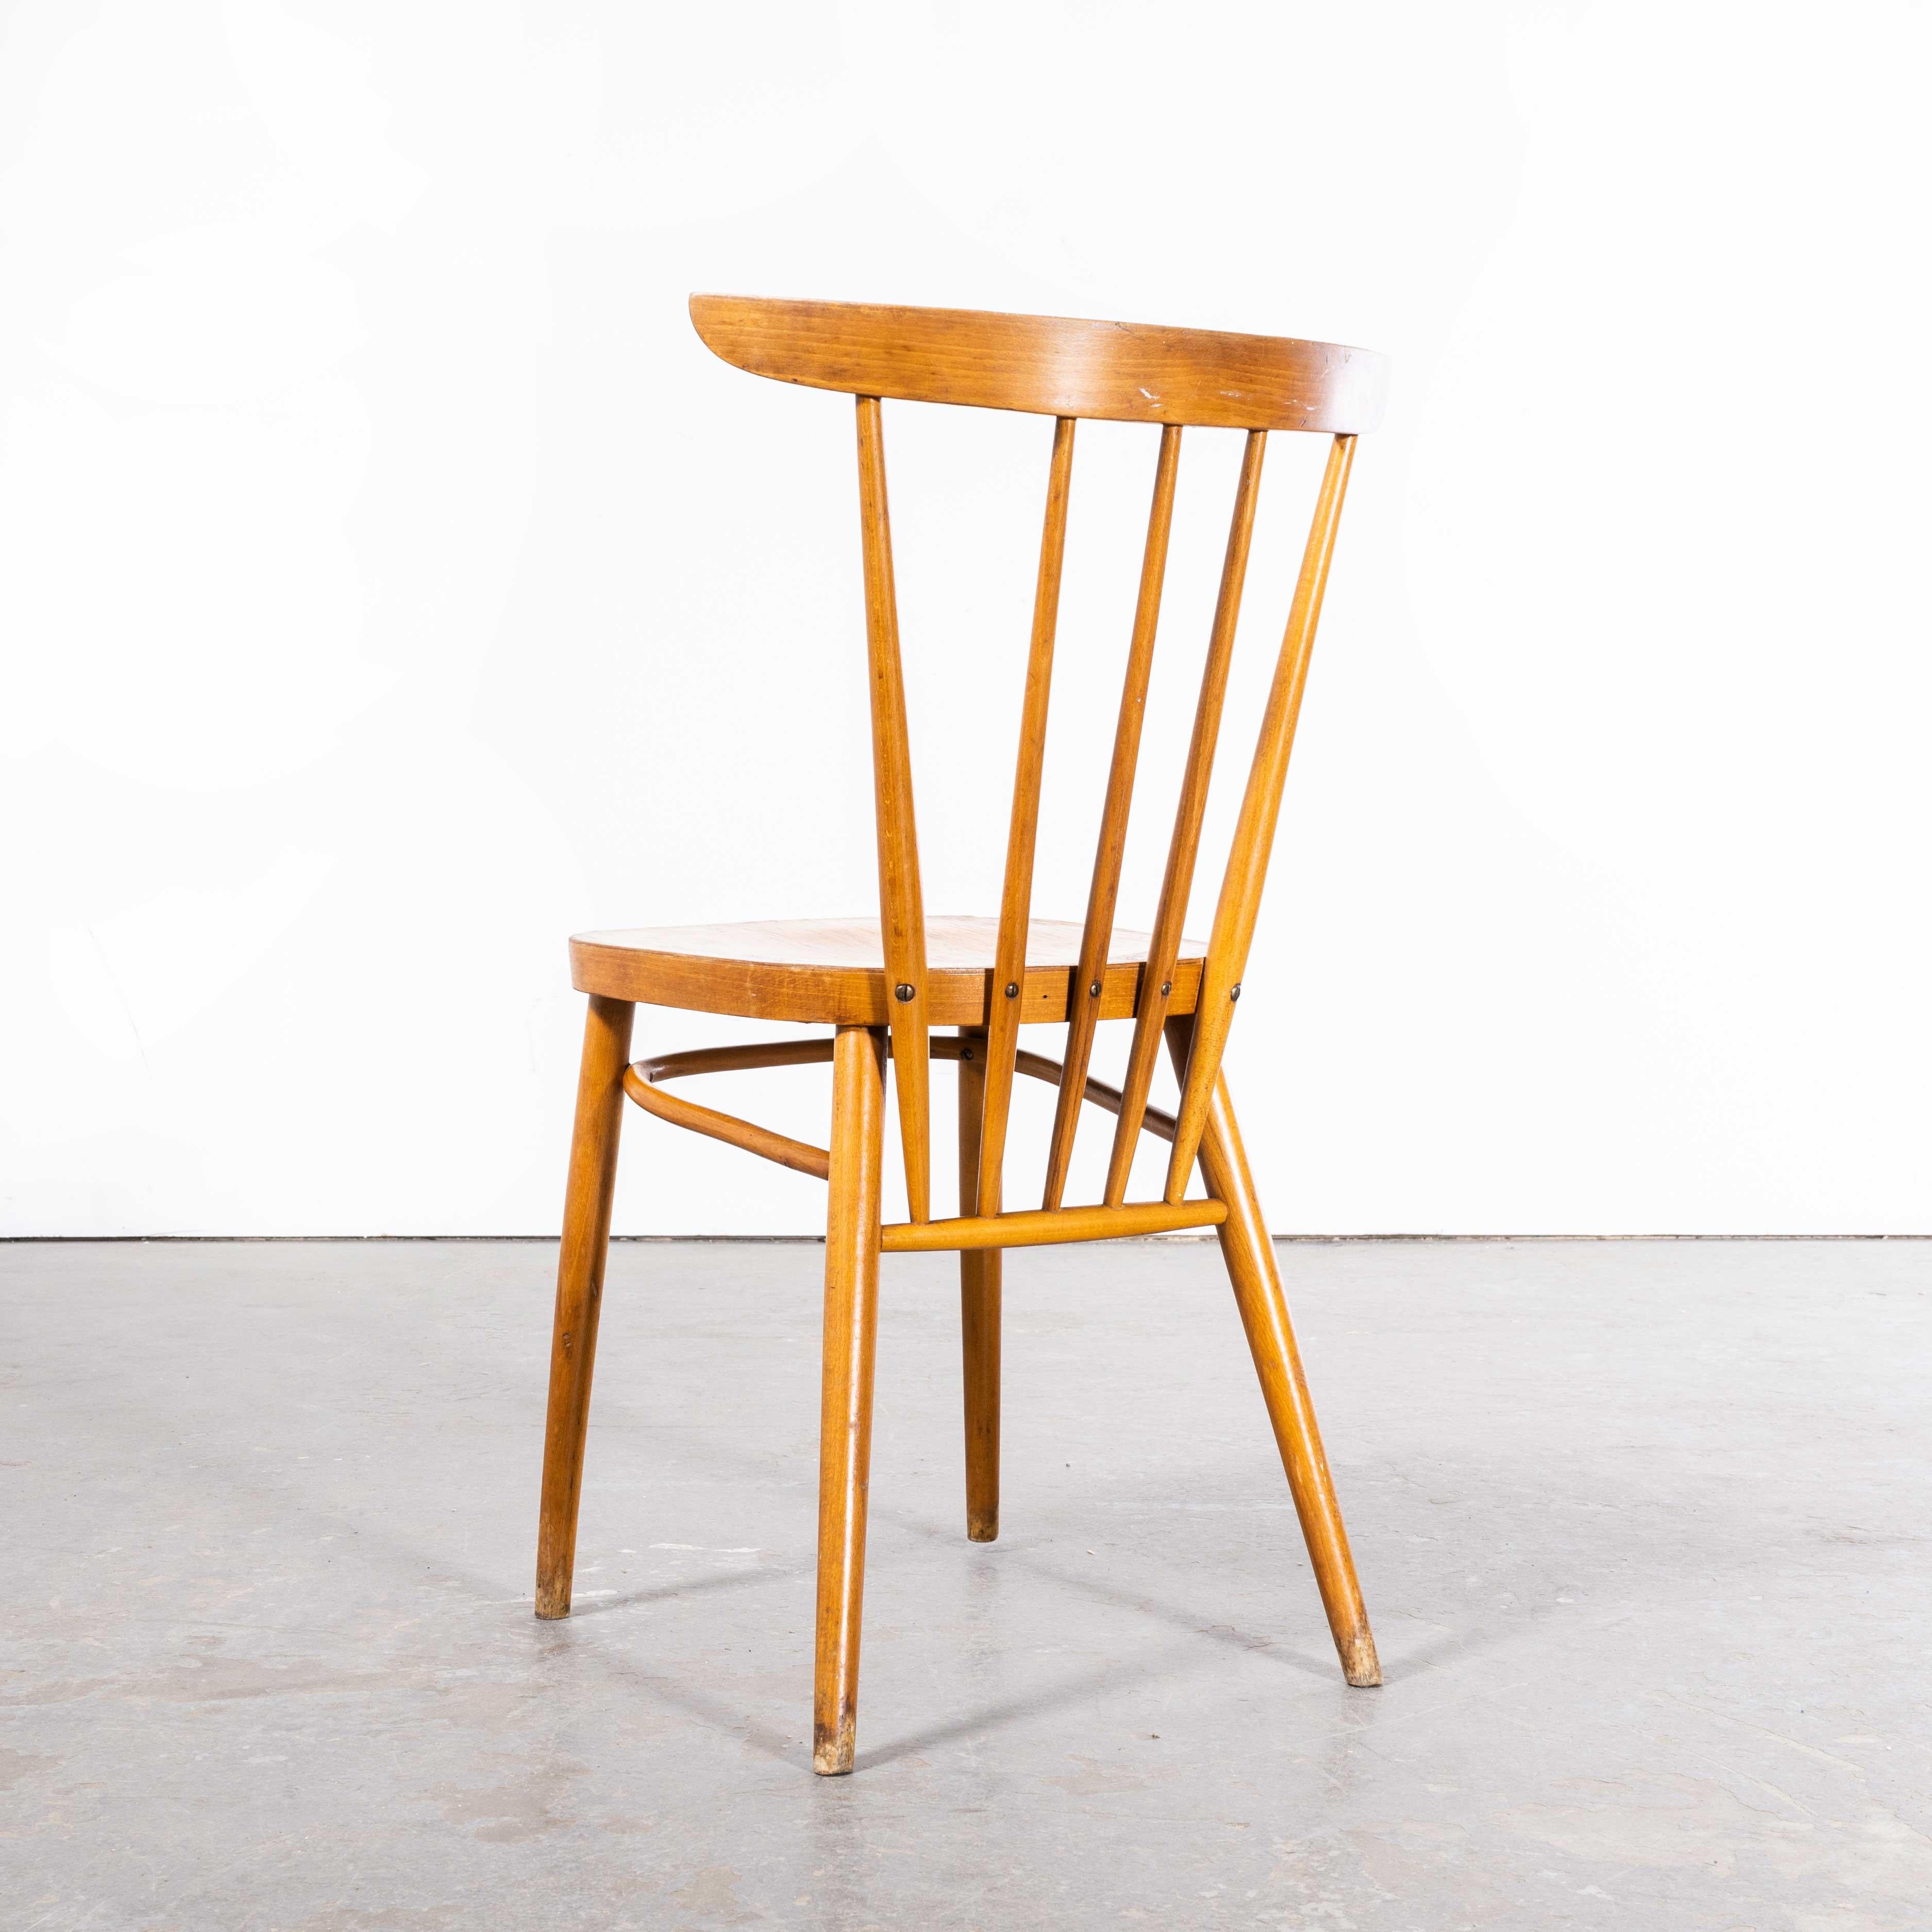 1950s Blonde Stickback Dining Chairs By Ton – Set Of Six
1950s Harlequin Stickback Chairs By Ton – Set Of Six. These chairs were produced by the famous Czech firm Ton, a post war spin off from the famous Thonet factory that was carved up and